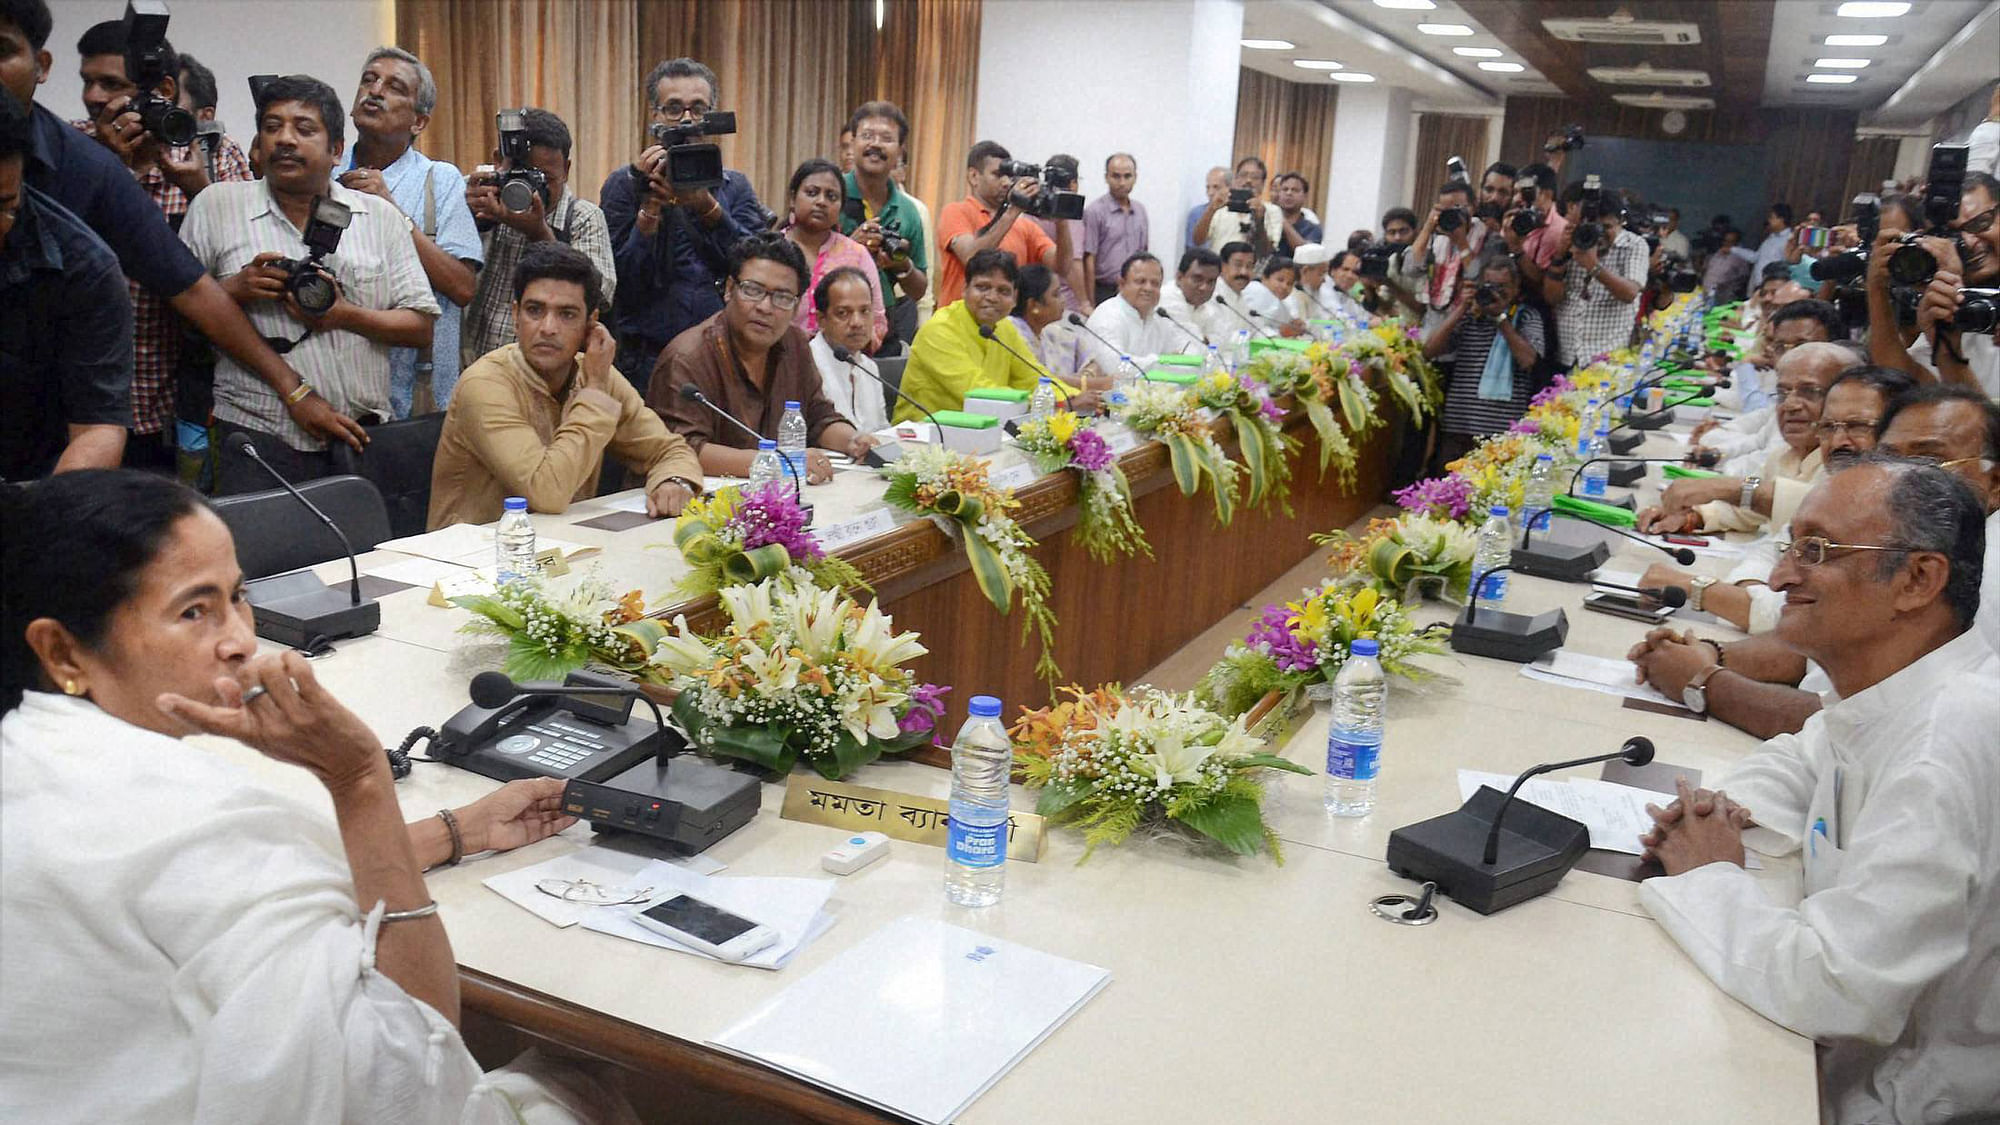 Kolkata: West Bengal Chief Minister Mamata Banerjee with cabinet colleagues during her first cabinet meeting at the Secretariat, Nabanna in Howrah near Kolkata. (Photo: PTI)